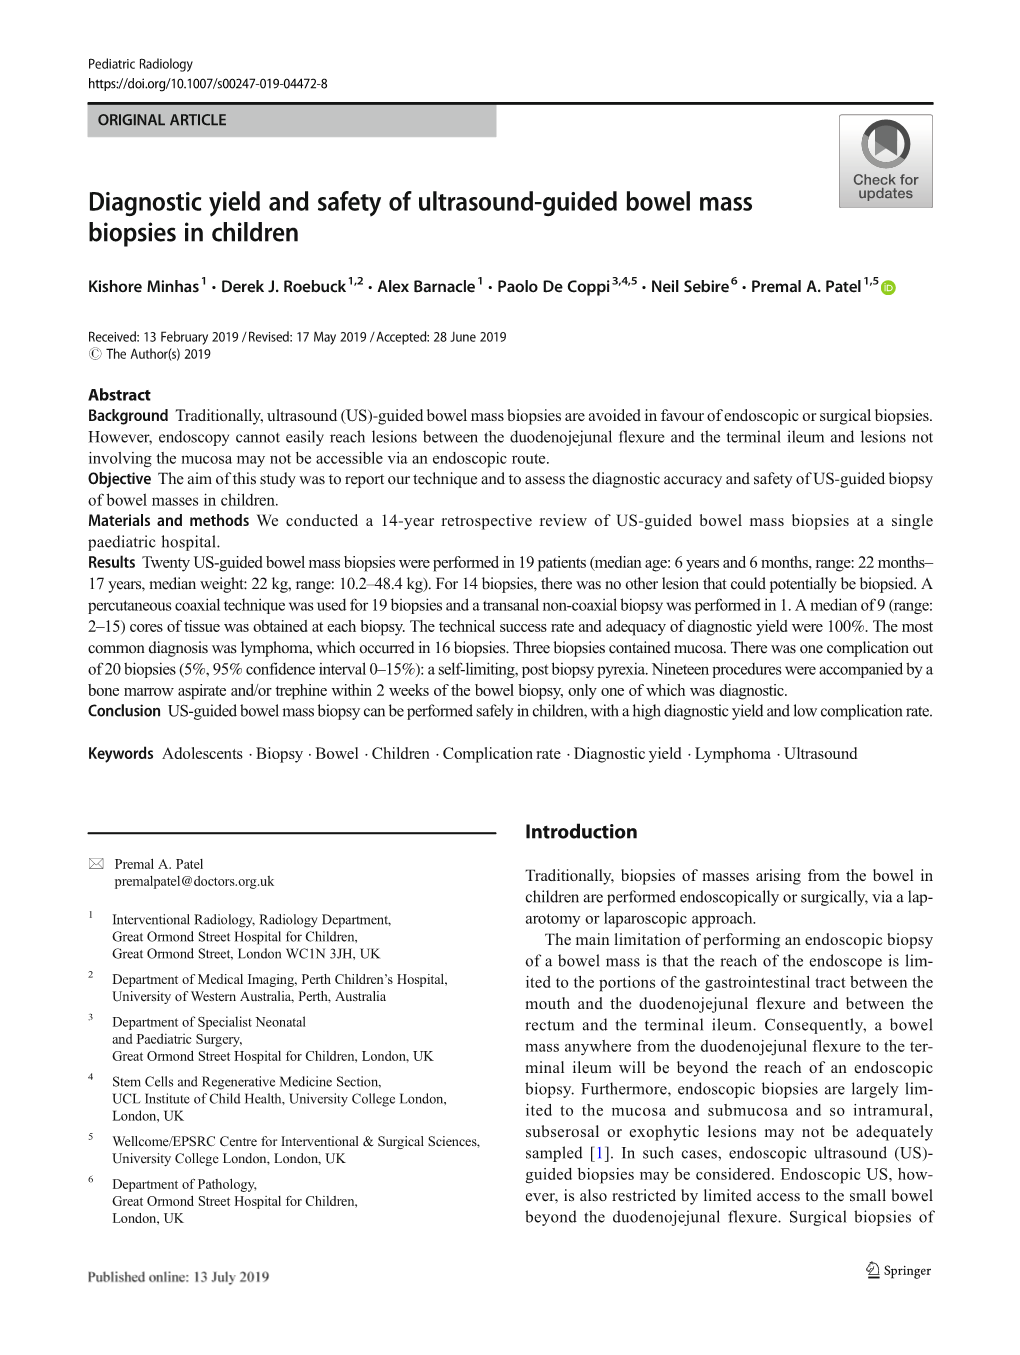 Diagnostic Yield and Safety of Ultrasound-Guided Bowel Mass Biopsies in Children